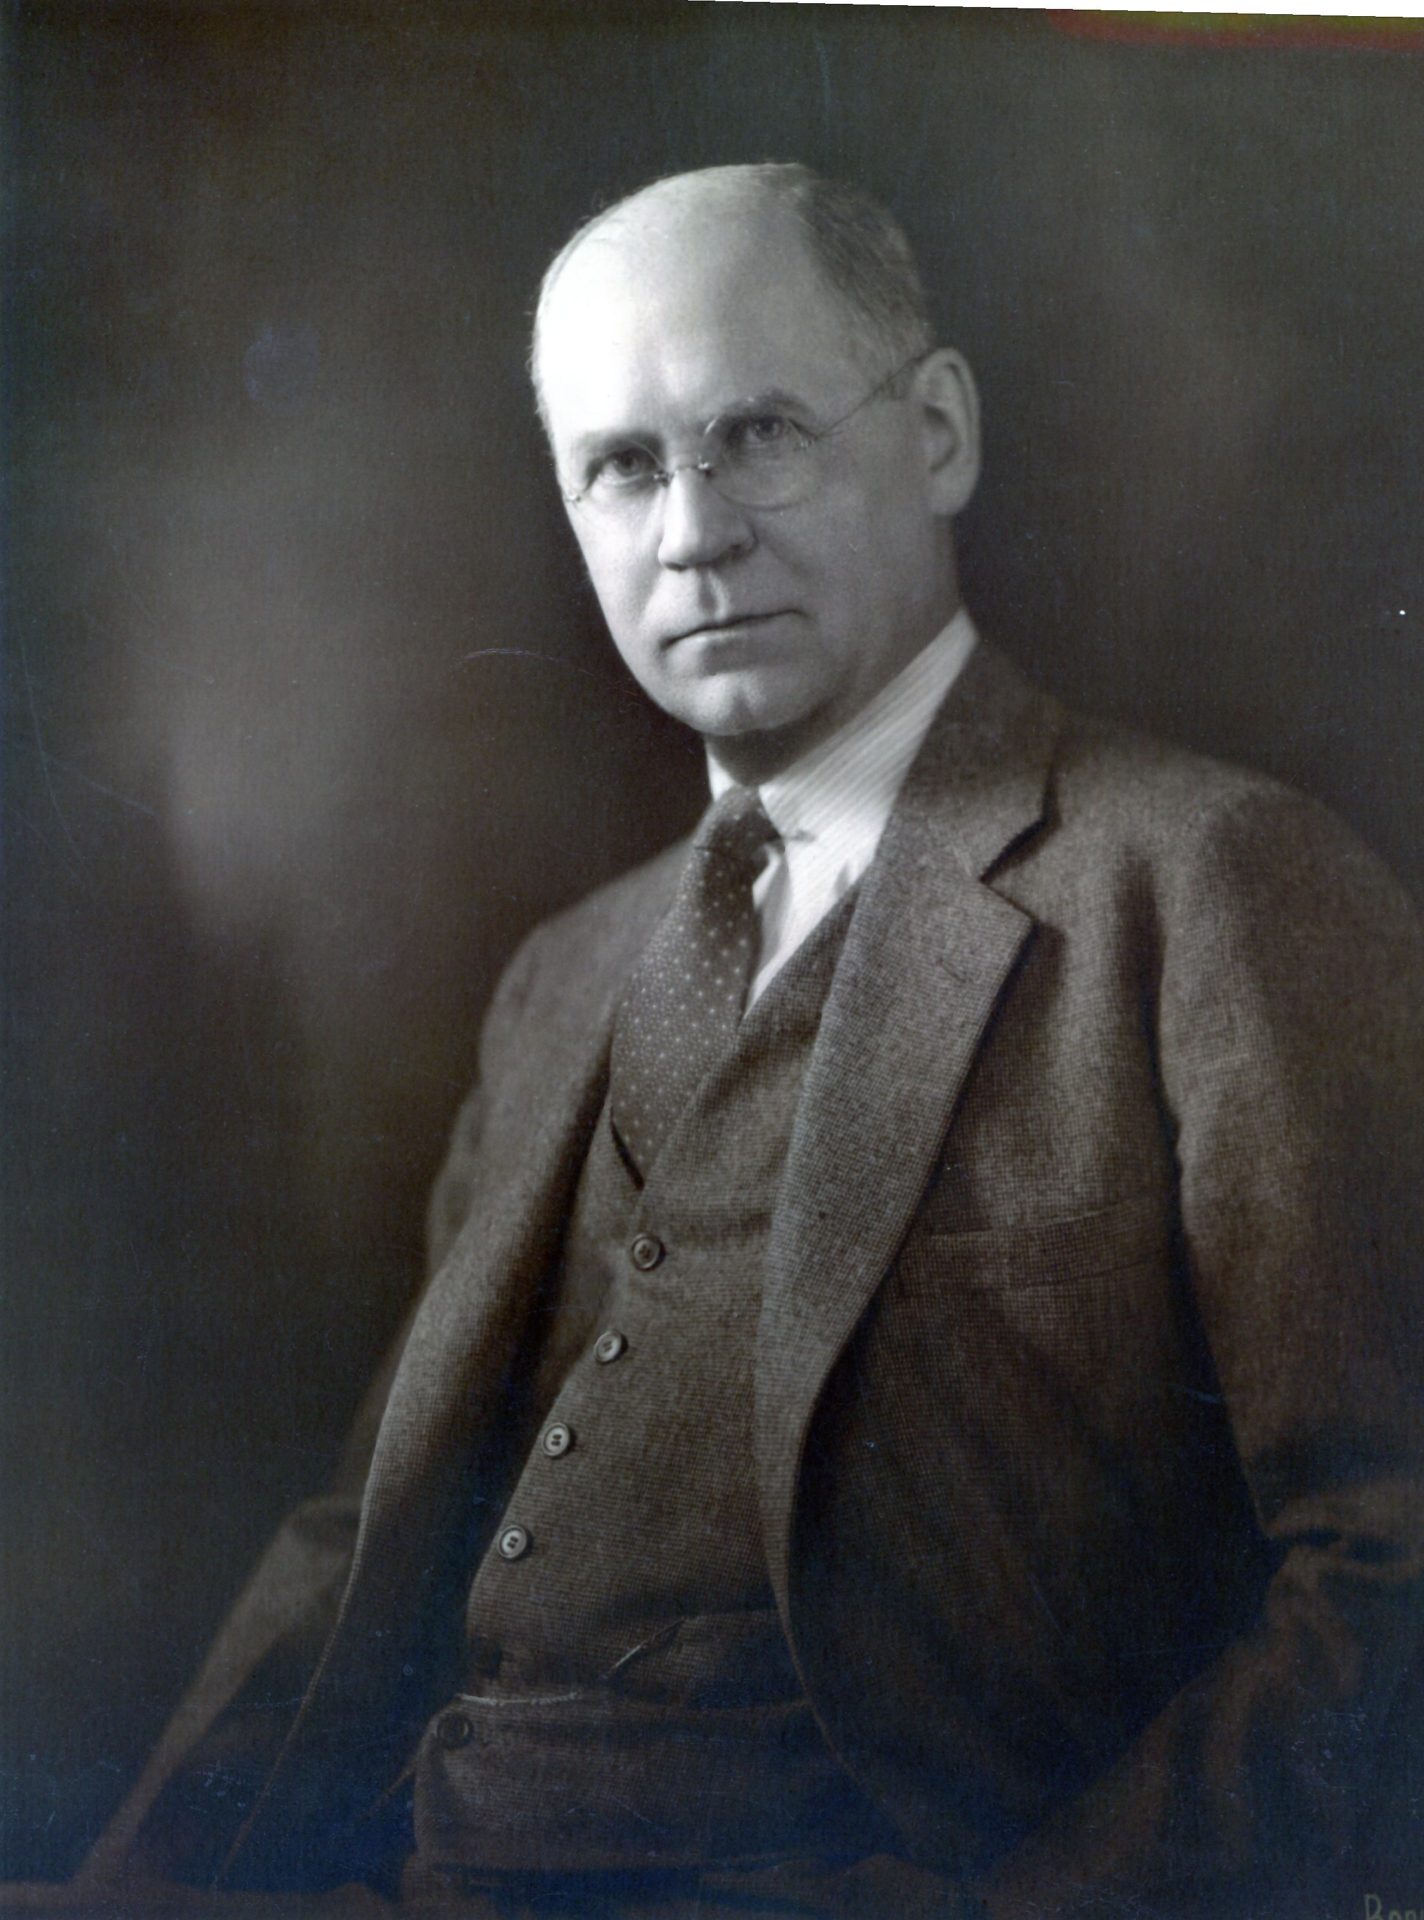 a black and white photo of a man with glasses wearing a suit and tie